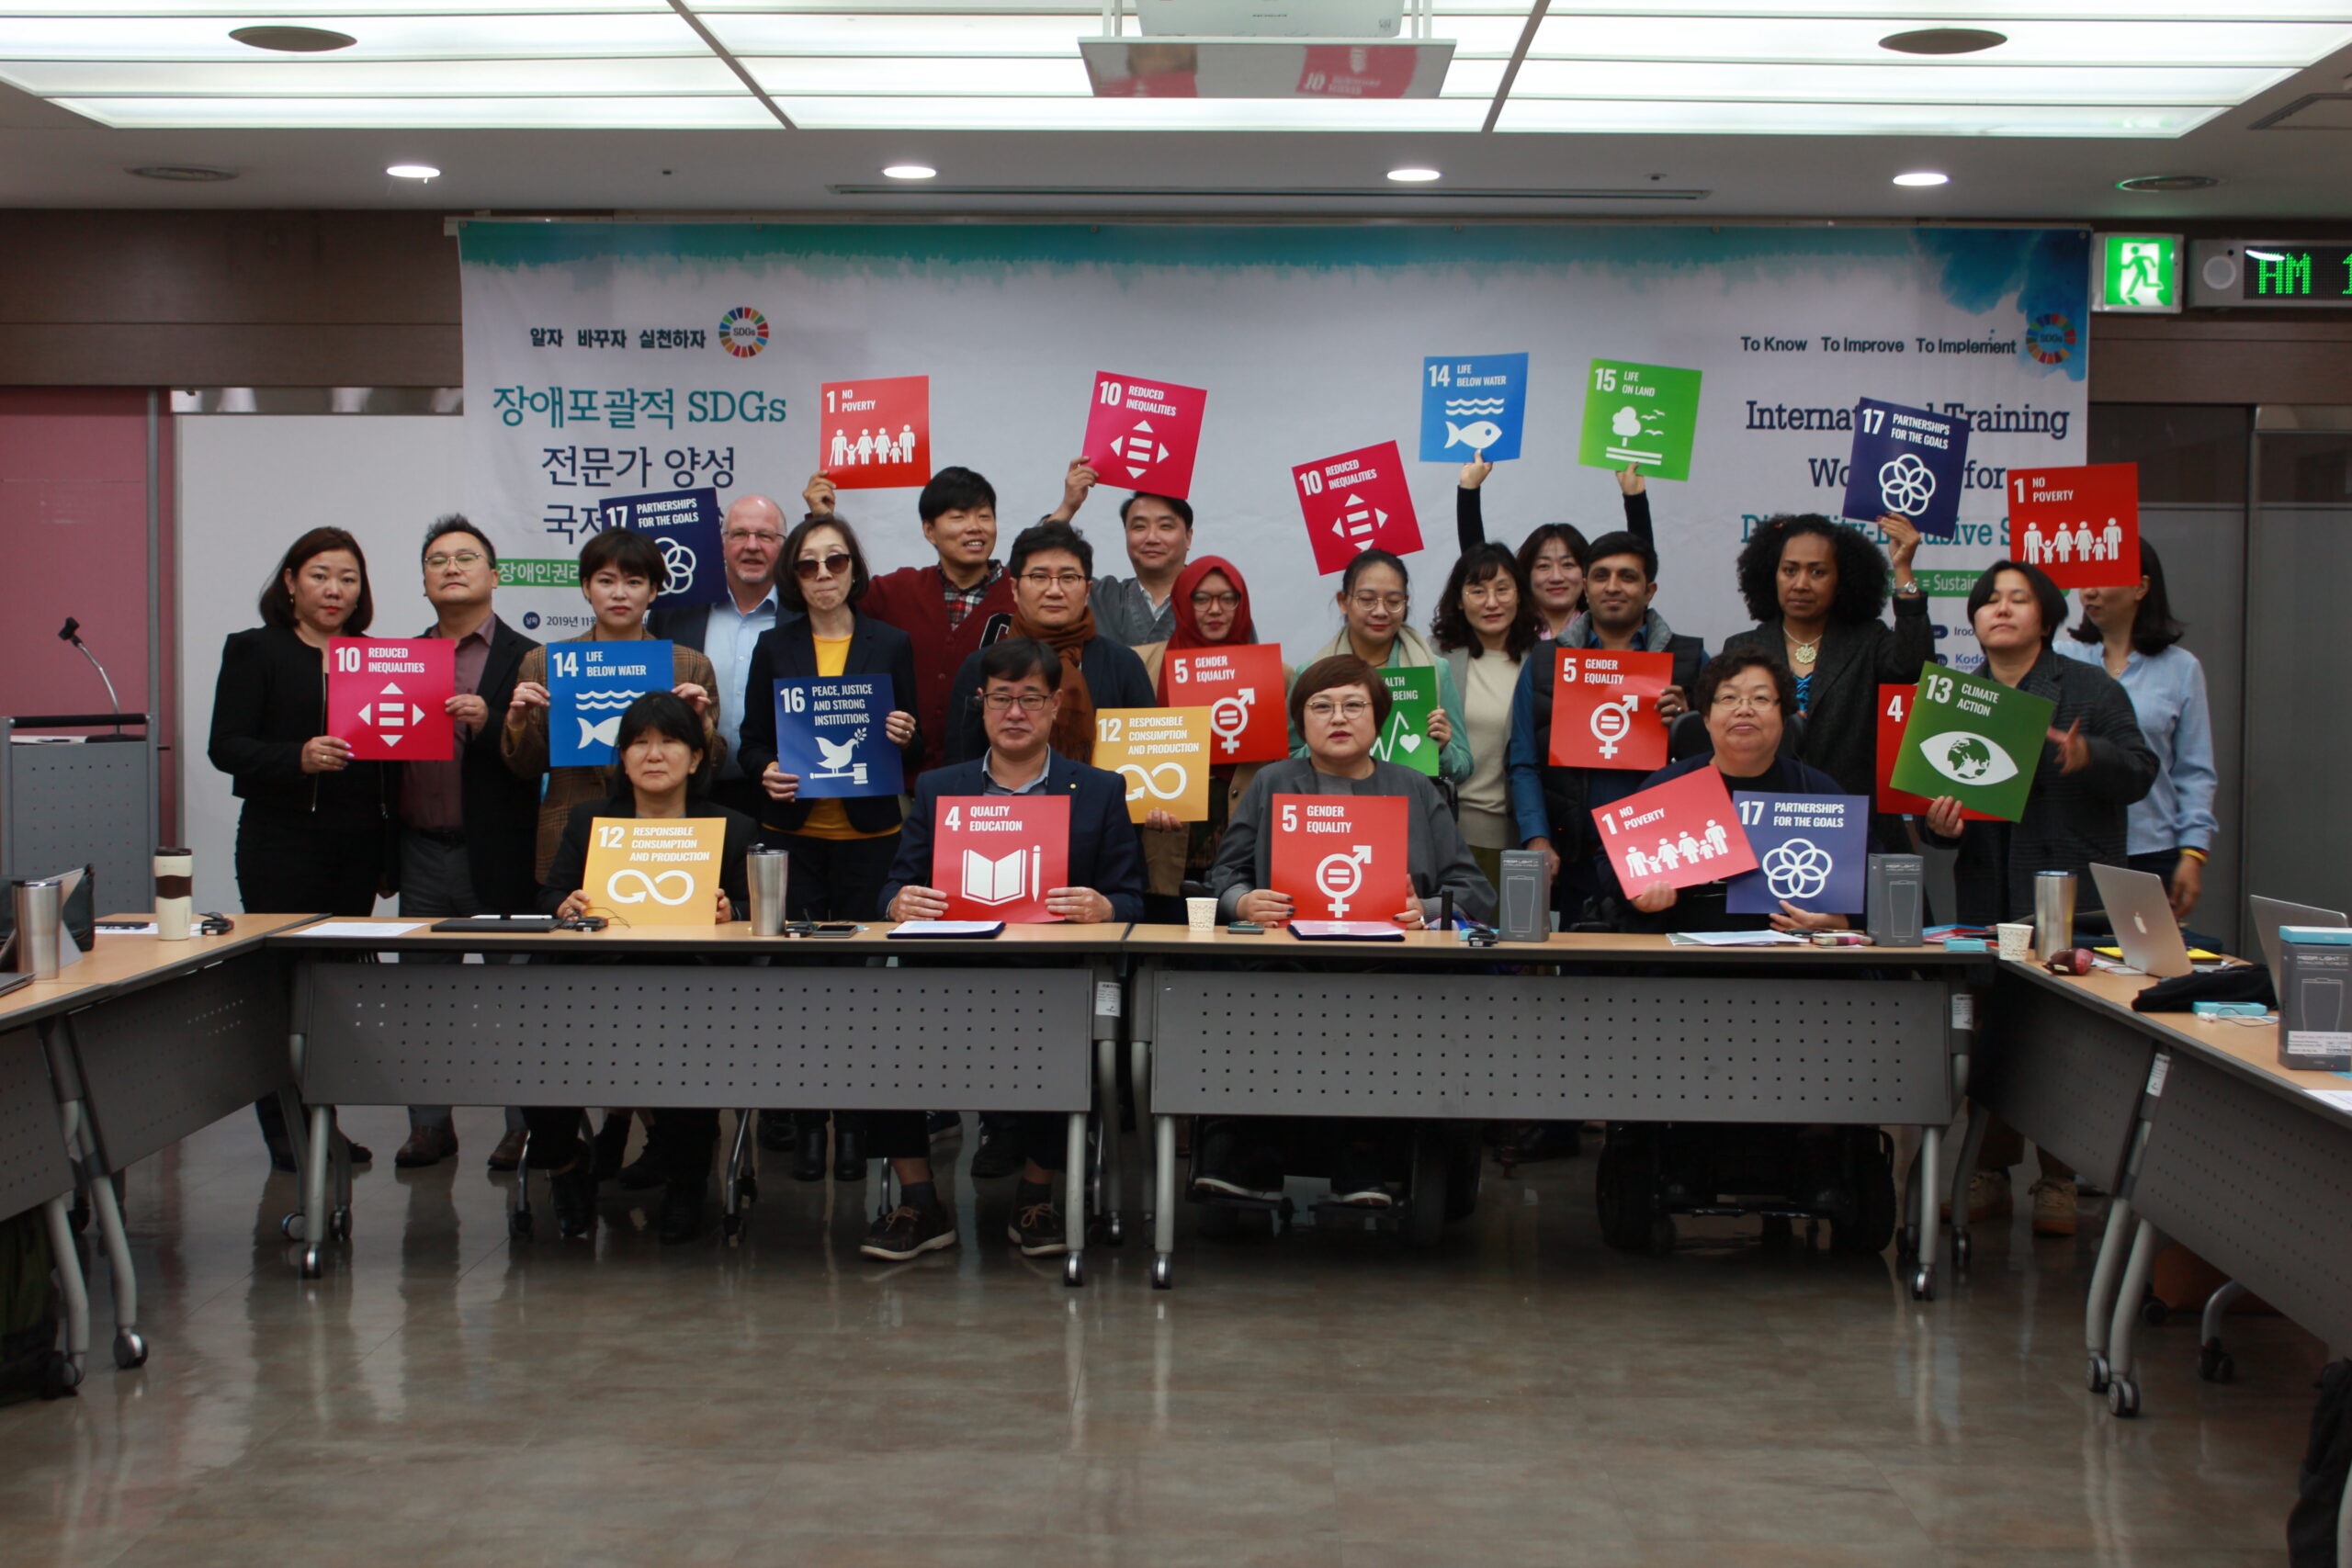 Delegates at the Korean Disability Forum Workshop in November 2019, seated and standing behind desks holding up cards which have prined on them the Sustainable Development Goals.